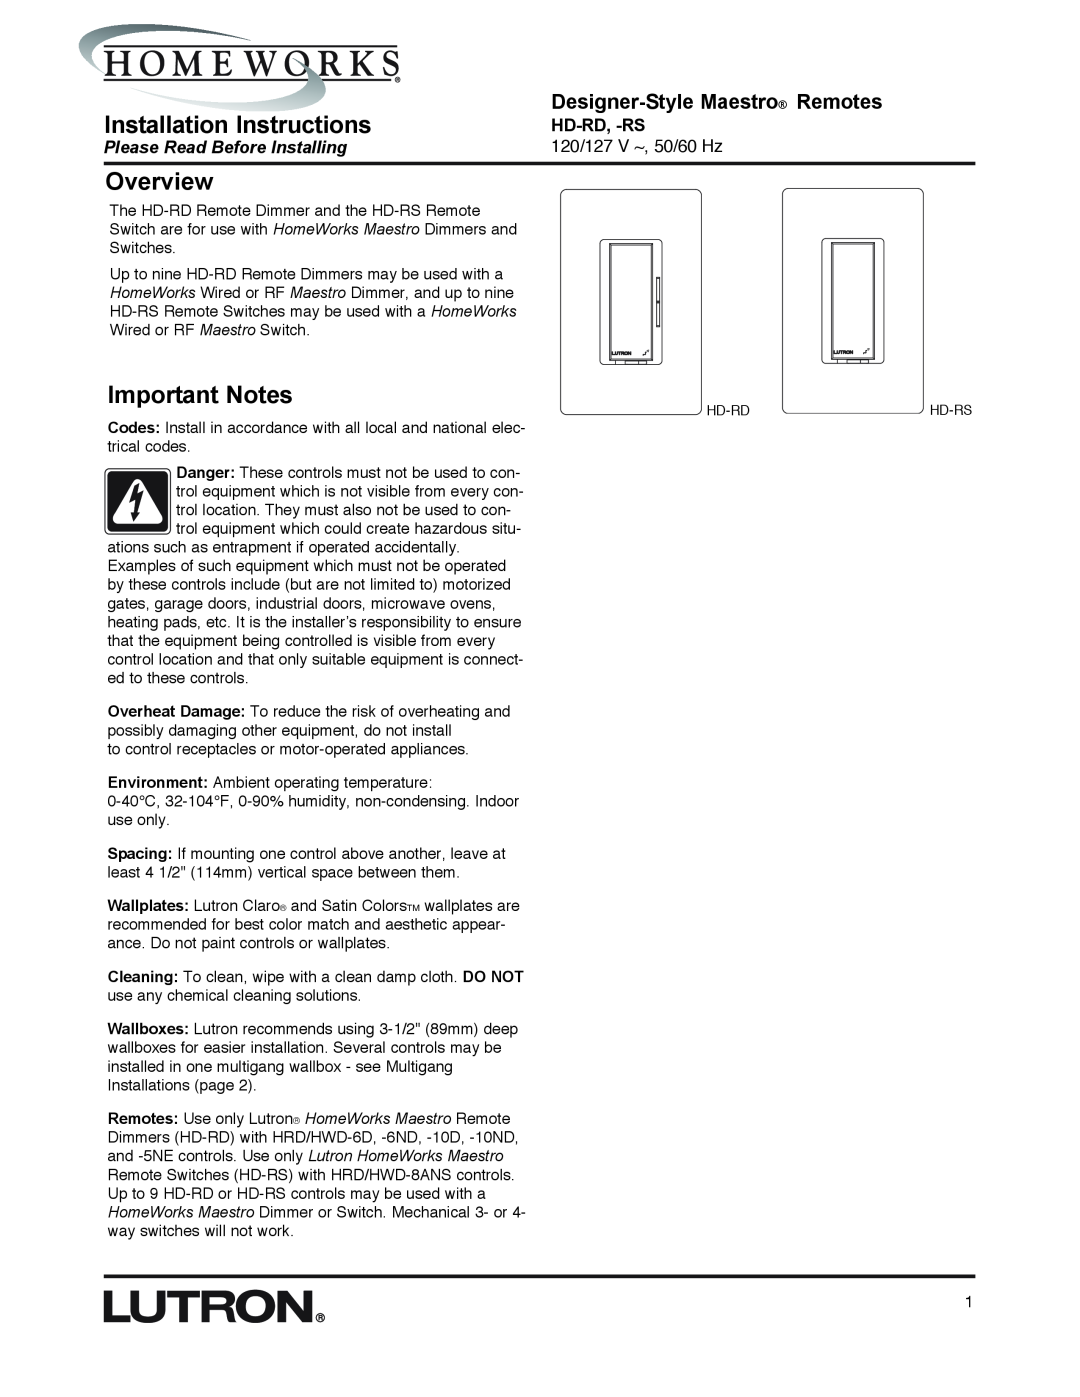 AMX HD-RD installation instructions Installation Instructions, Overview, Important Notes, Designer-Style Maestro Remotes 